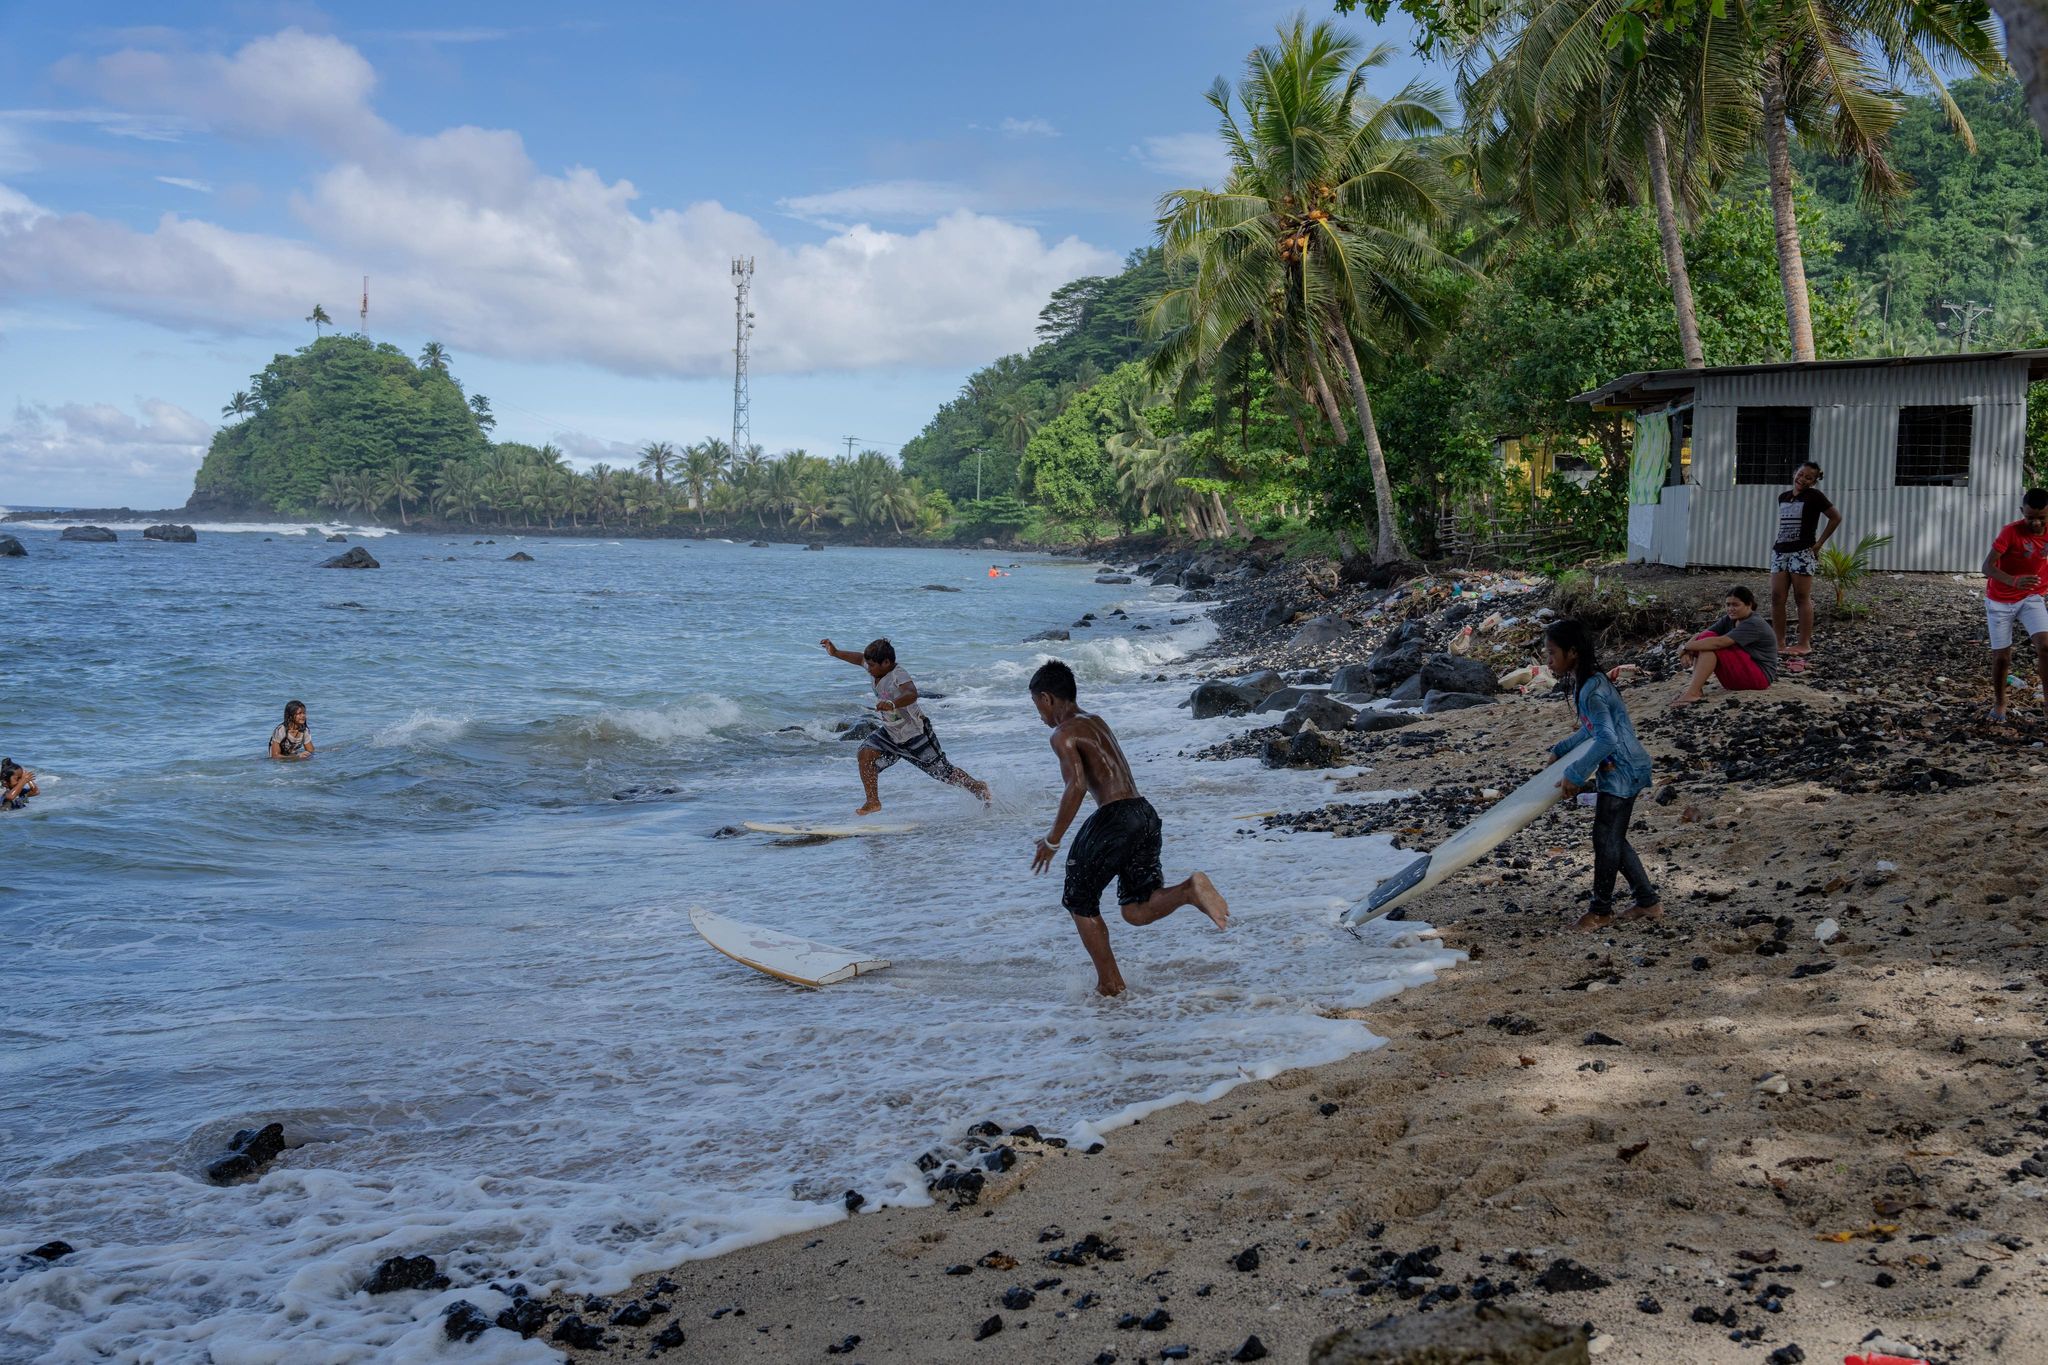 Samoan village kids running in the shallow surf to get their broken half board, playing in the water.